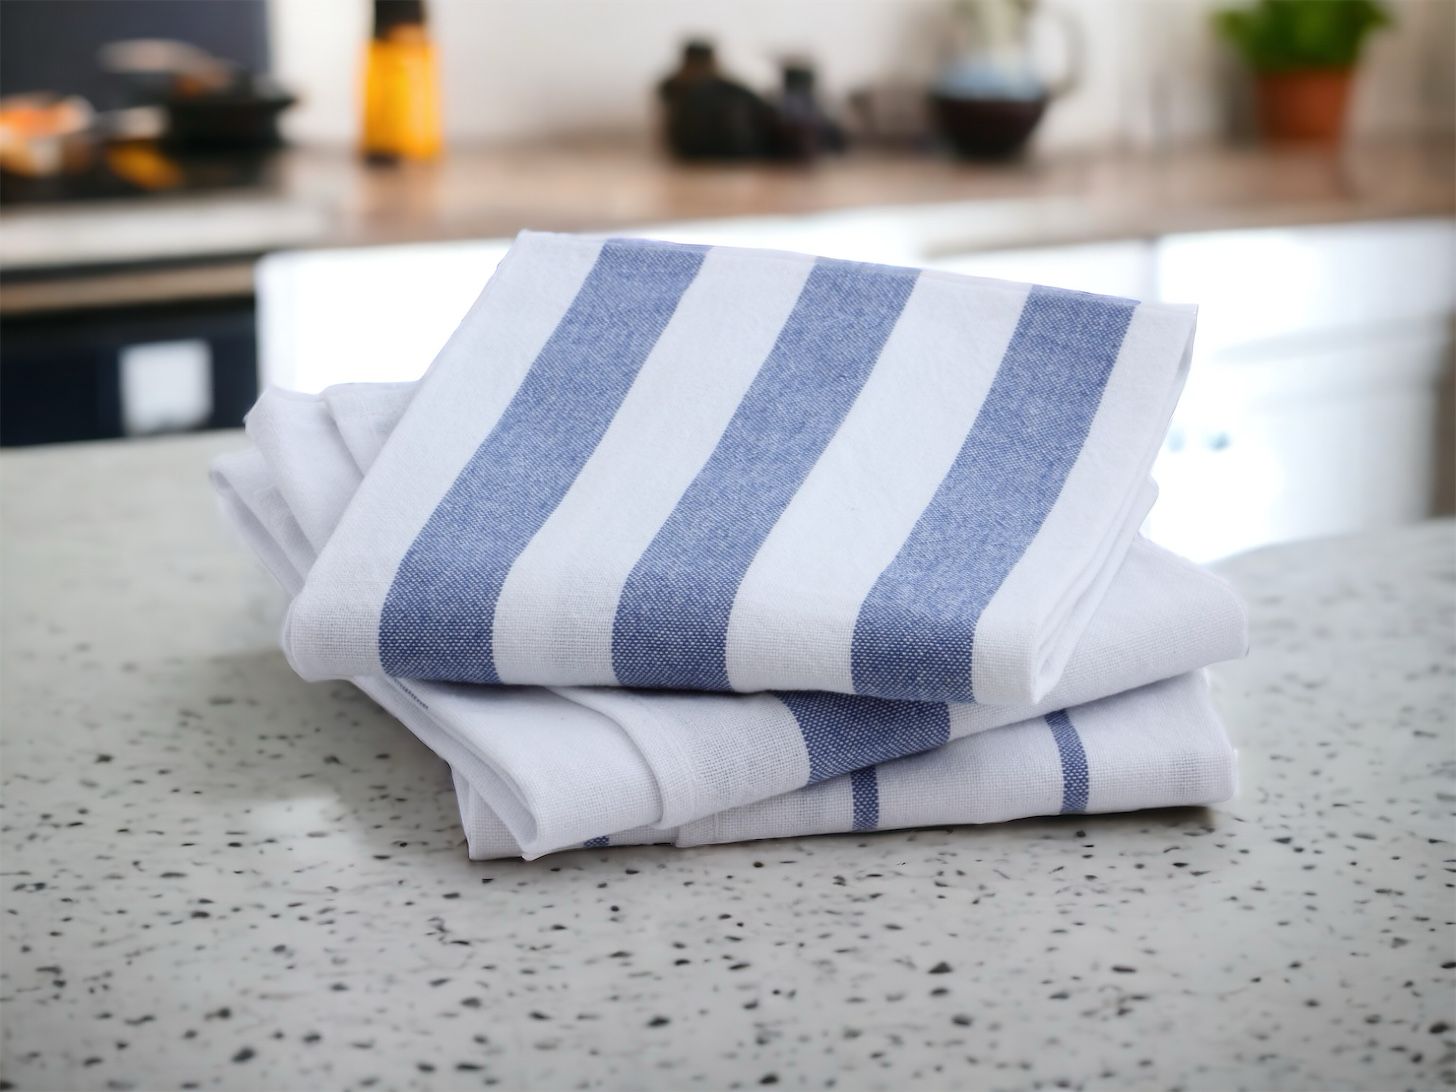 What is the difference between a tea towel and a kitchen towel?